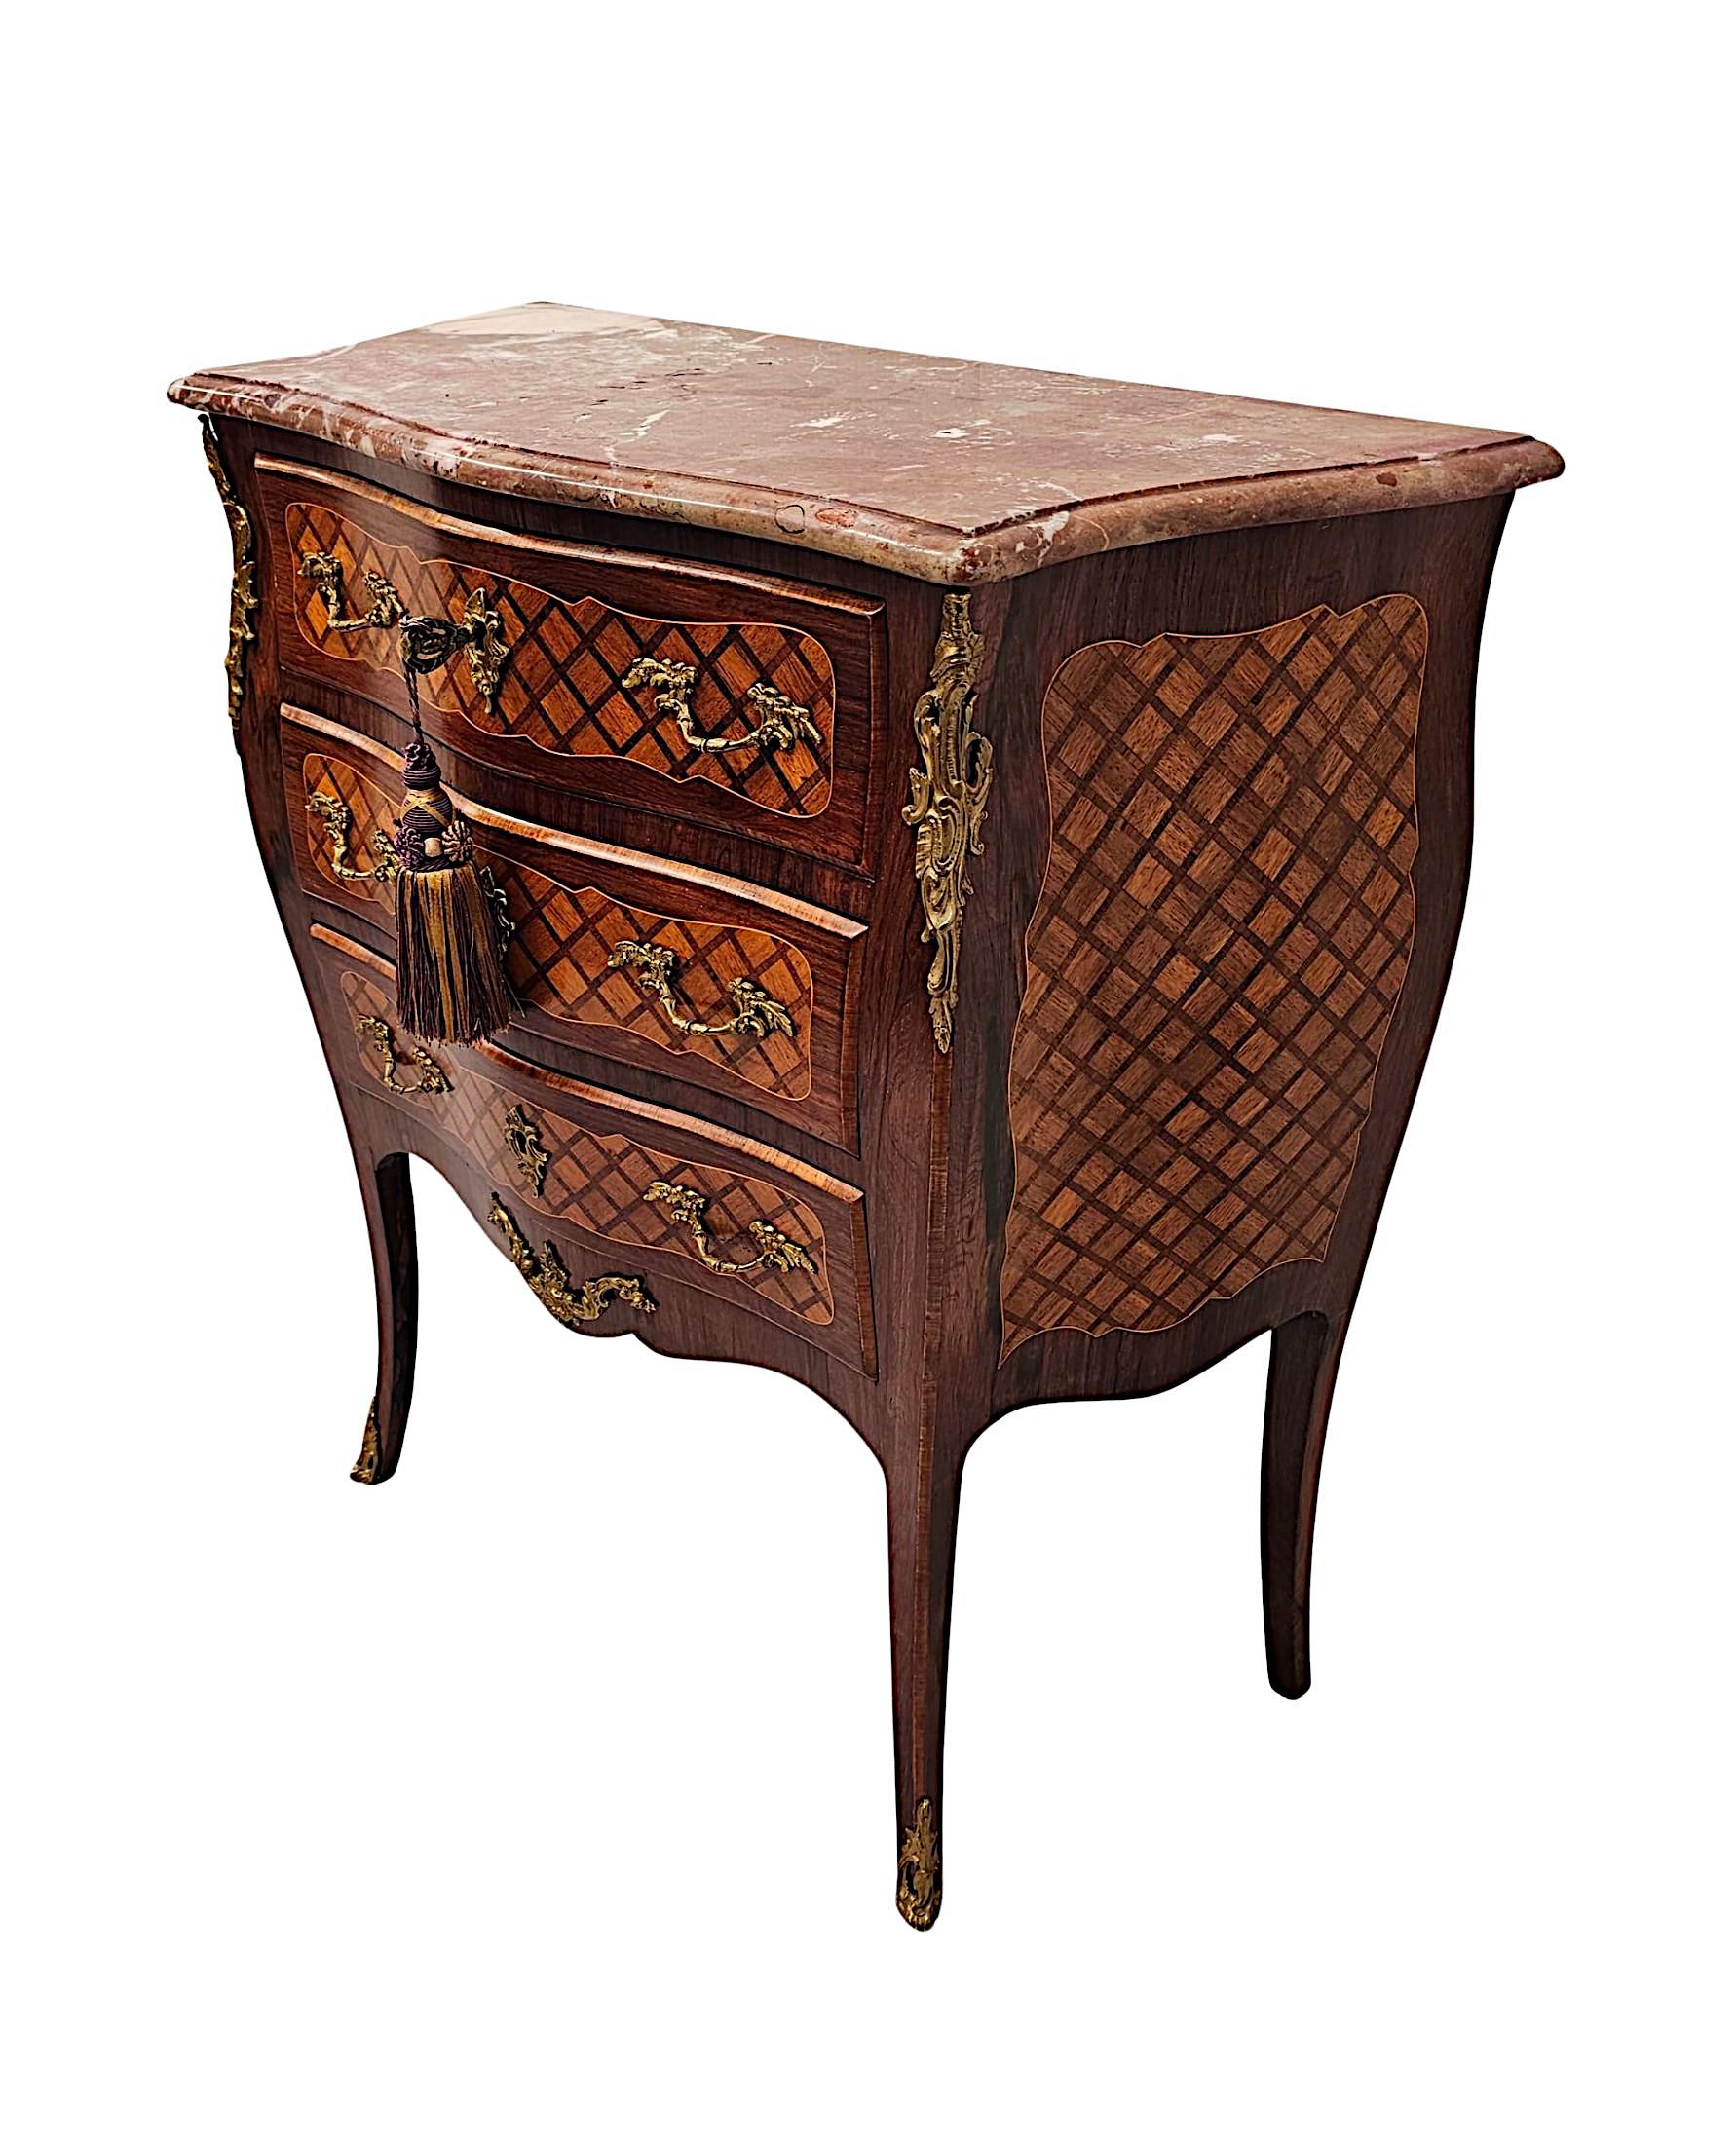 A very rare 19th Century marble top kingwood and fruitwood chest of neat proportions.  This gorgeous piece is of exceptional quality, finely hand carved, line inlaid and ormolu mounted throughout with beautifully rich patination and grain.  The